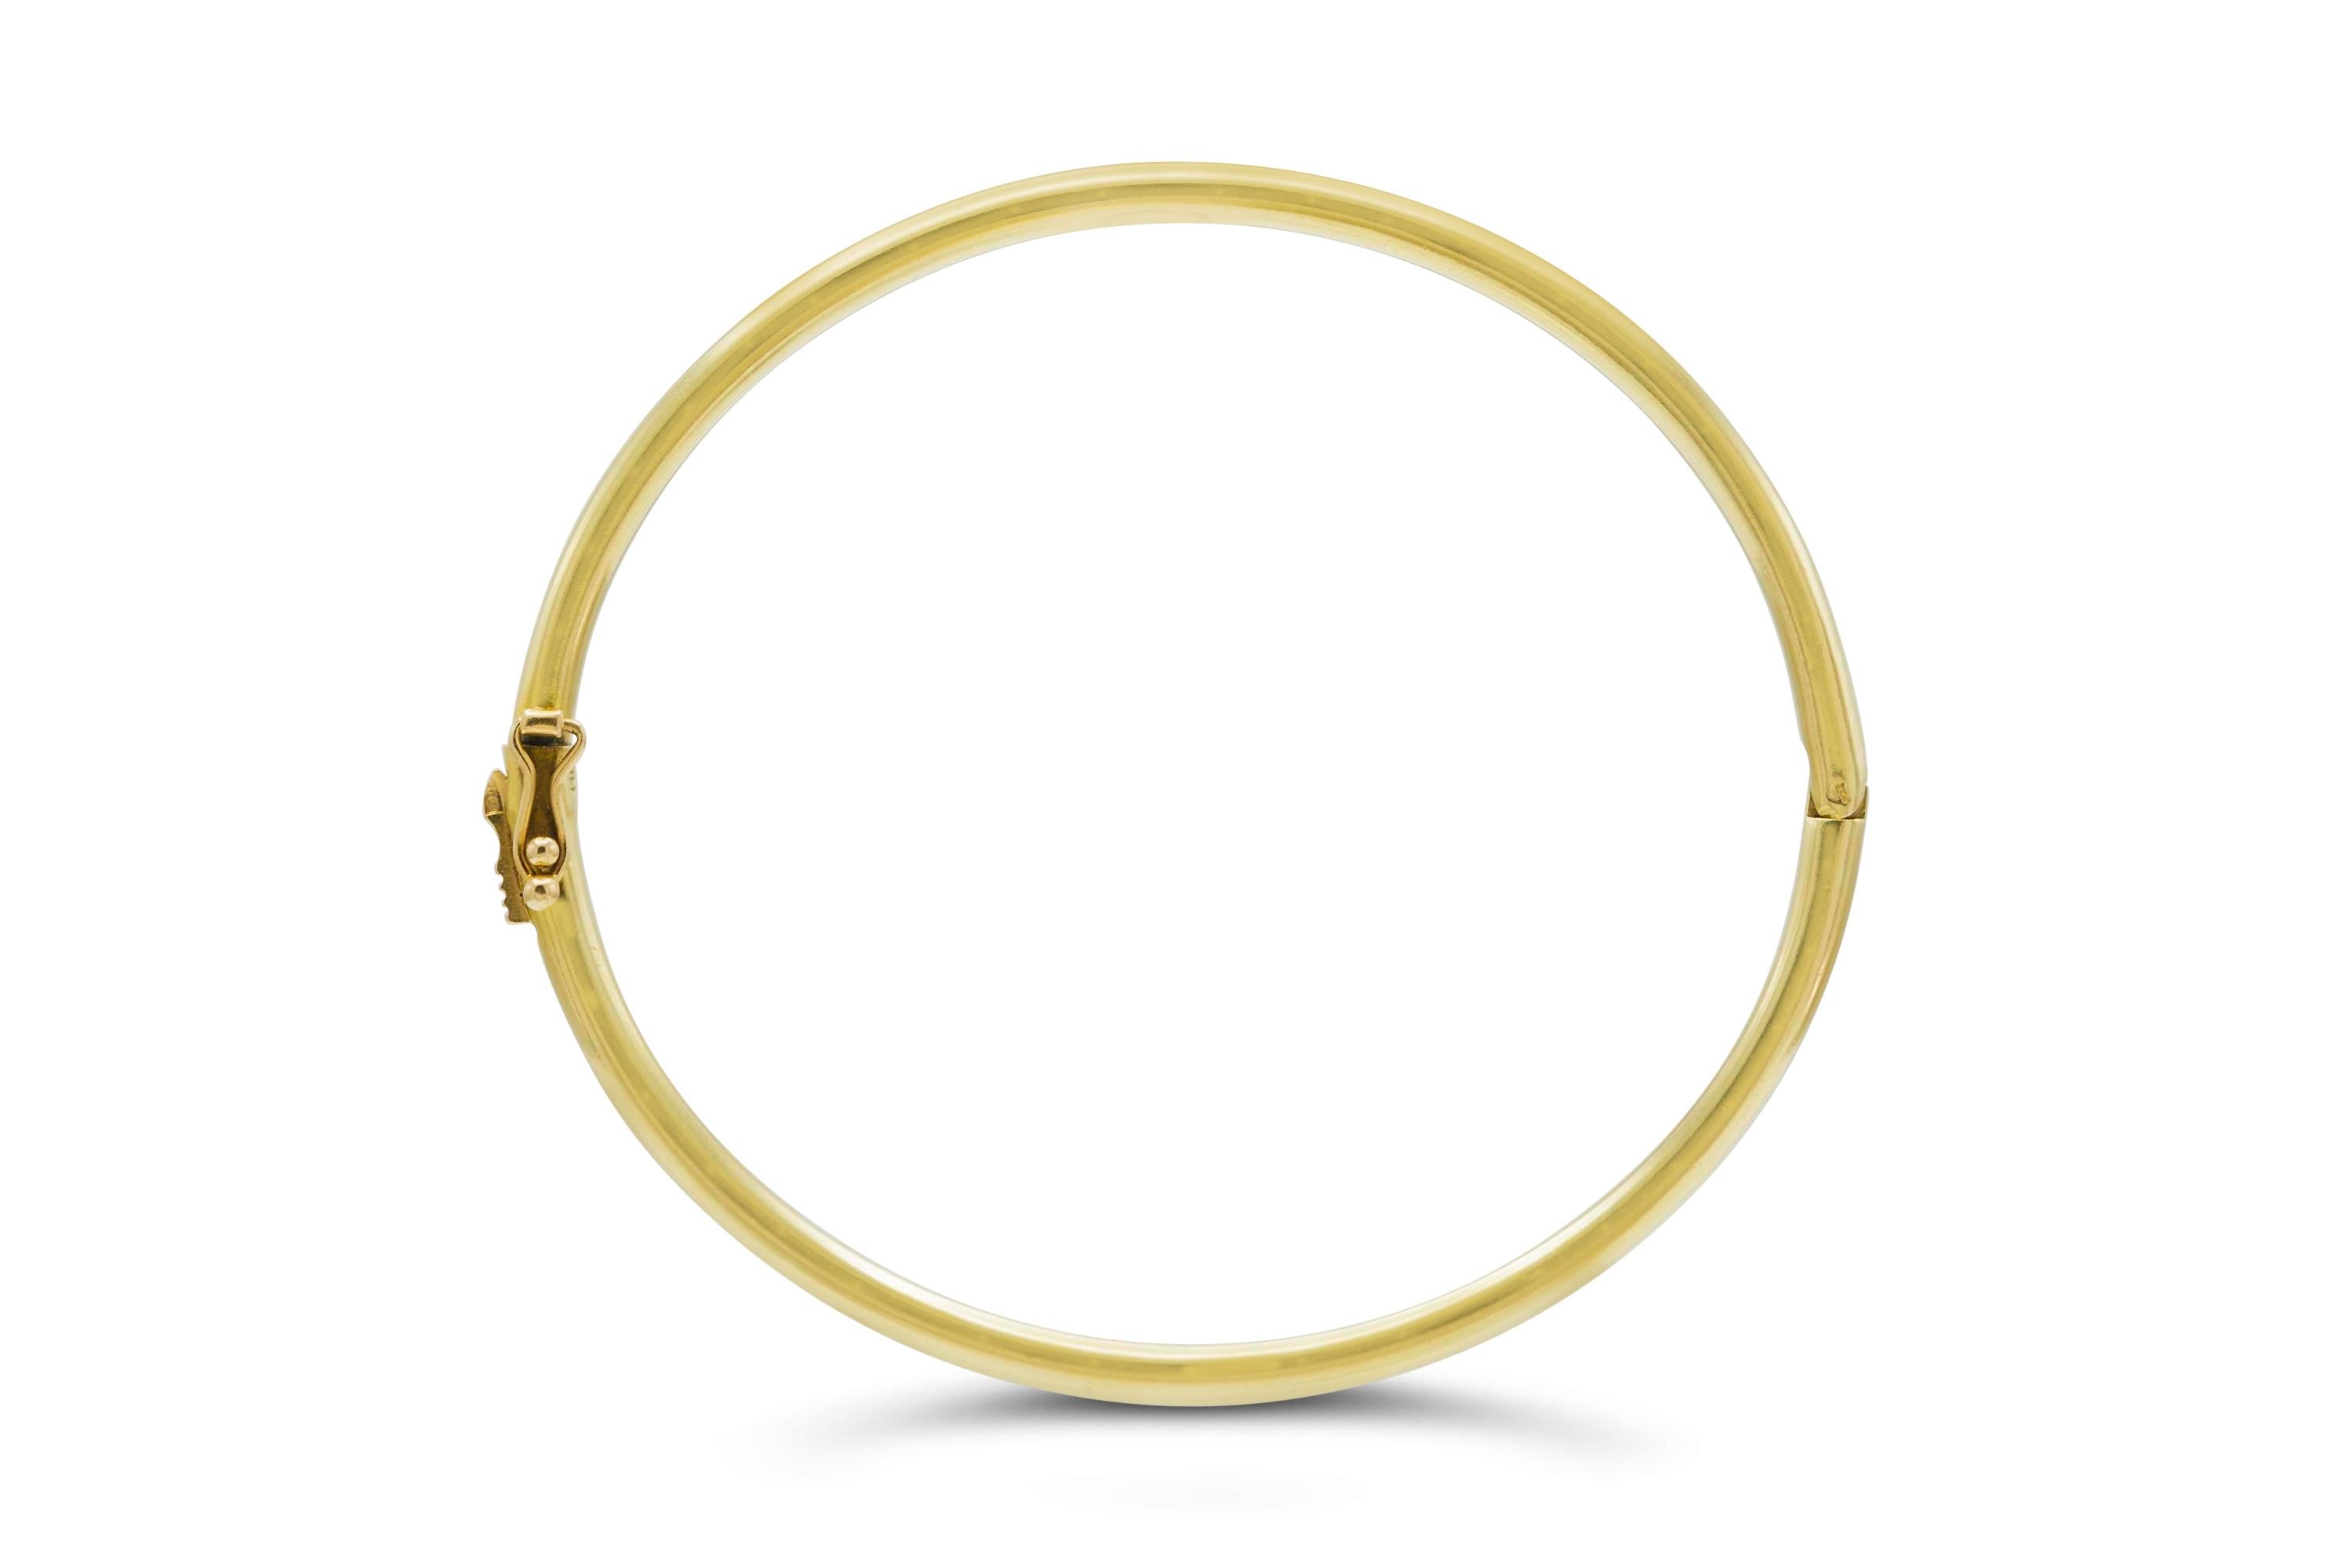 Finely crafted in 14k yellow gold.
Size 7 inches